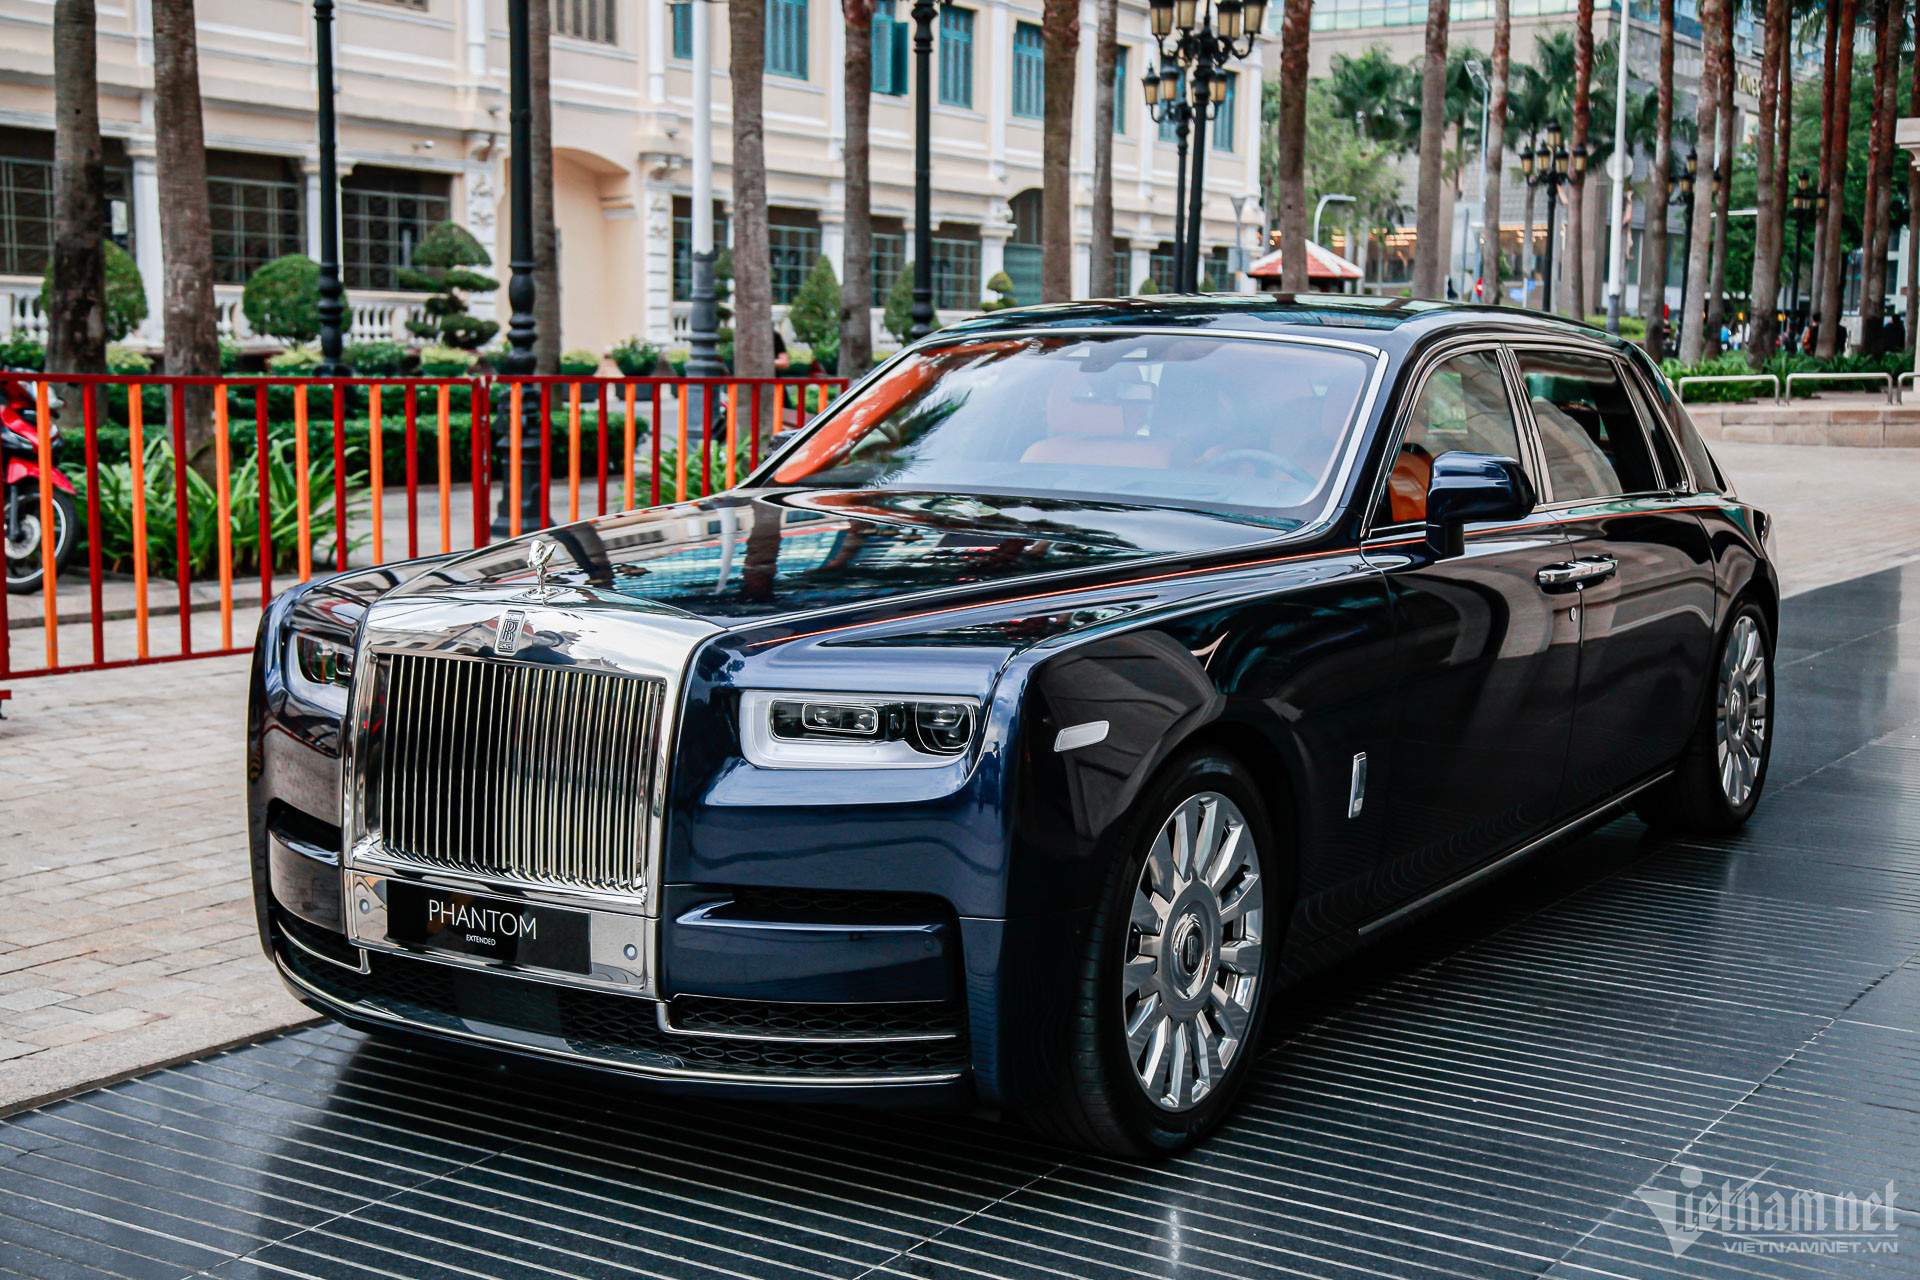 bao mike tyson surprised everyone when he gave his son a roll royce cullinan on his st birthday and made his son s dream come true 652bf817394fc Mike Tyson Surprised Everyone When He Gave His Son A Roll Royce Cullinan On His 21st Birthday And Made His Son's Dream Come True.